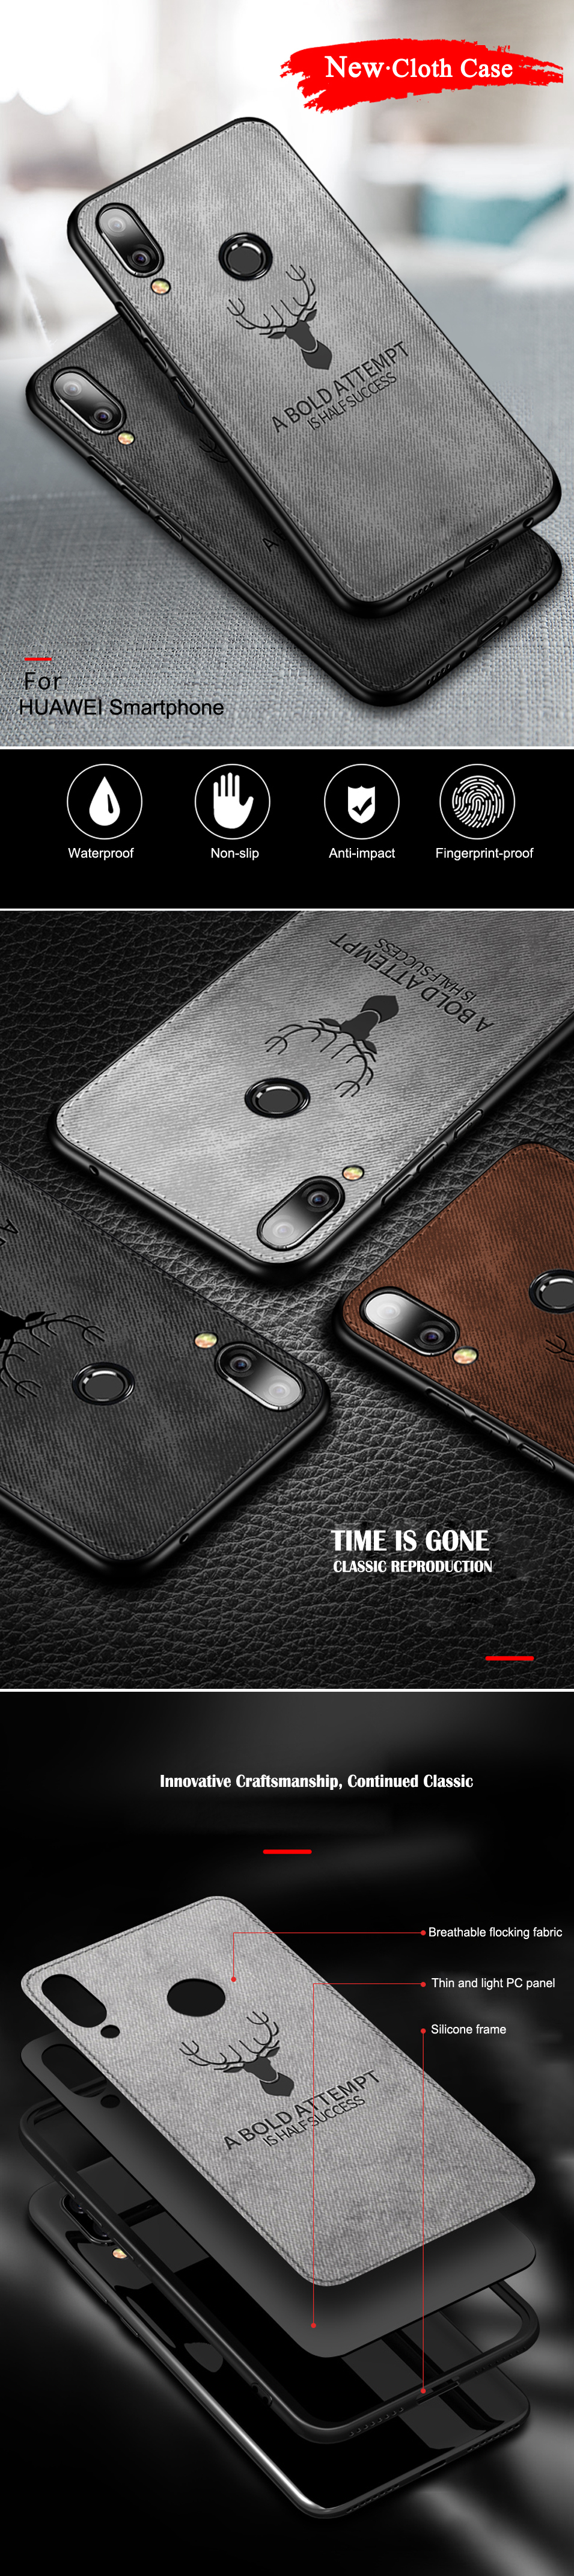 BAKEEY-Deer-Shockproof-Anti-Scratch-ClothTPU-Protective-Case-For-Huawei-Honor-8X-1454759-1